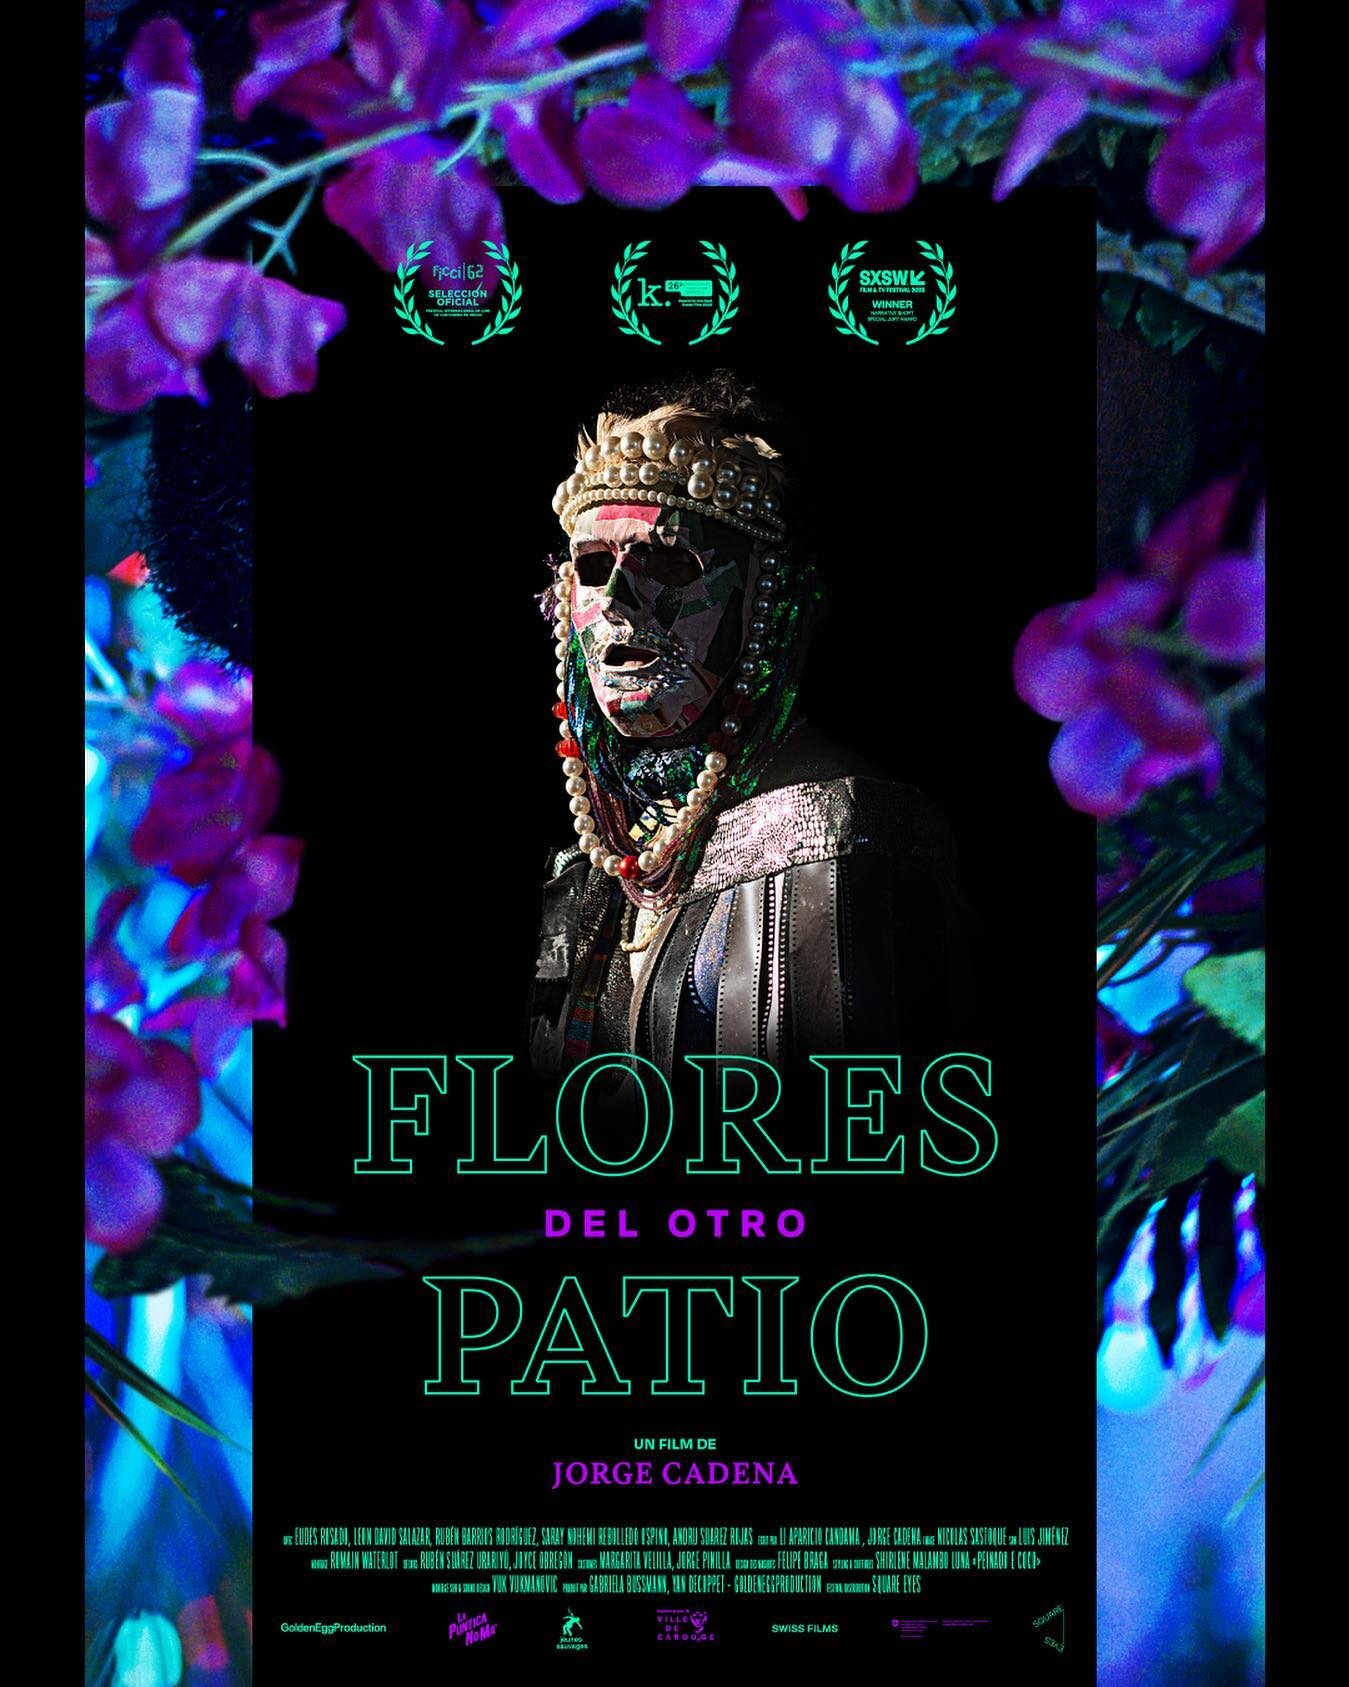 Film poster design for @floresdelotropatio 

@sxsw 2x23

Directed by @jorgecadenac 
Produced by @goldenegg_production  @yandecop 

#sxsw #sxsw2023 #filmposter #filmposterdesign #posterdesign #posterdesigncommunity #movieposter #movieposterdesign